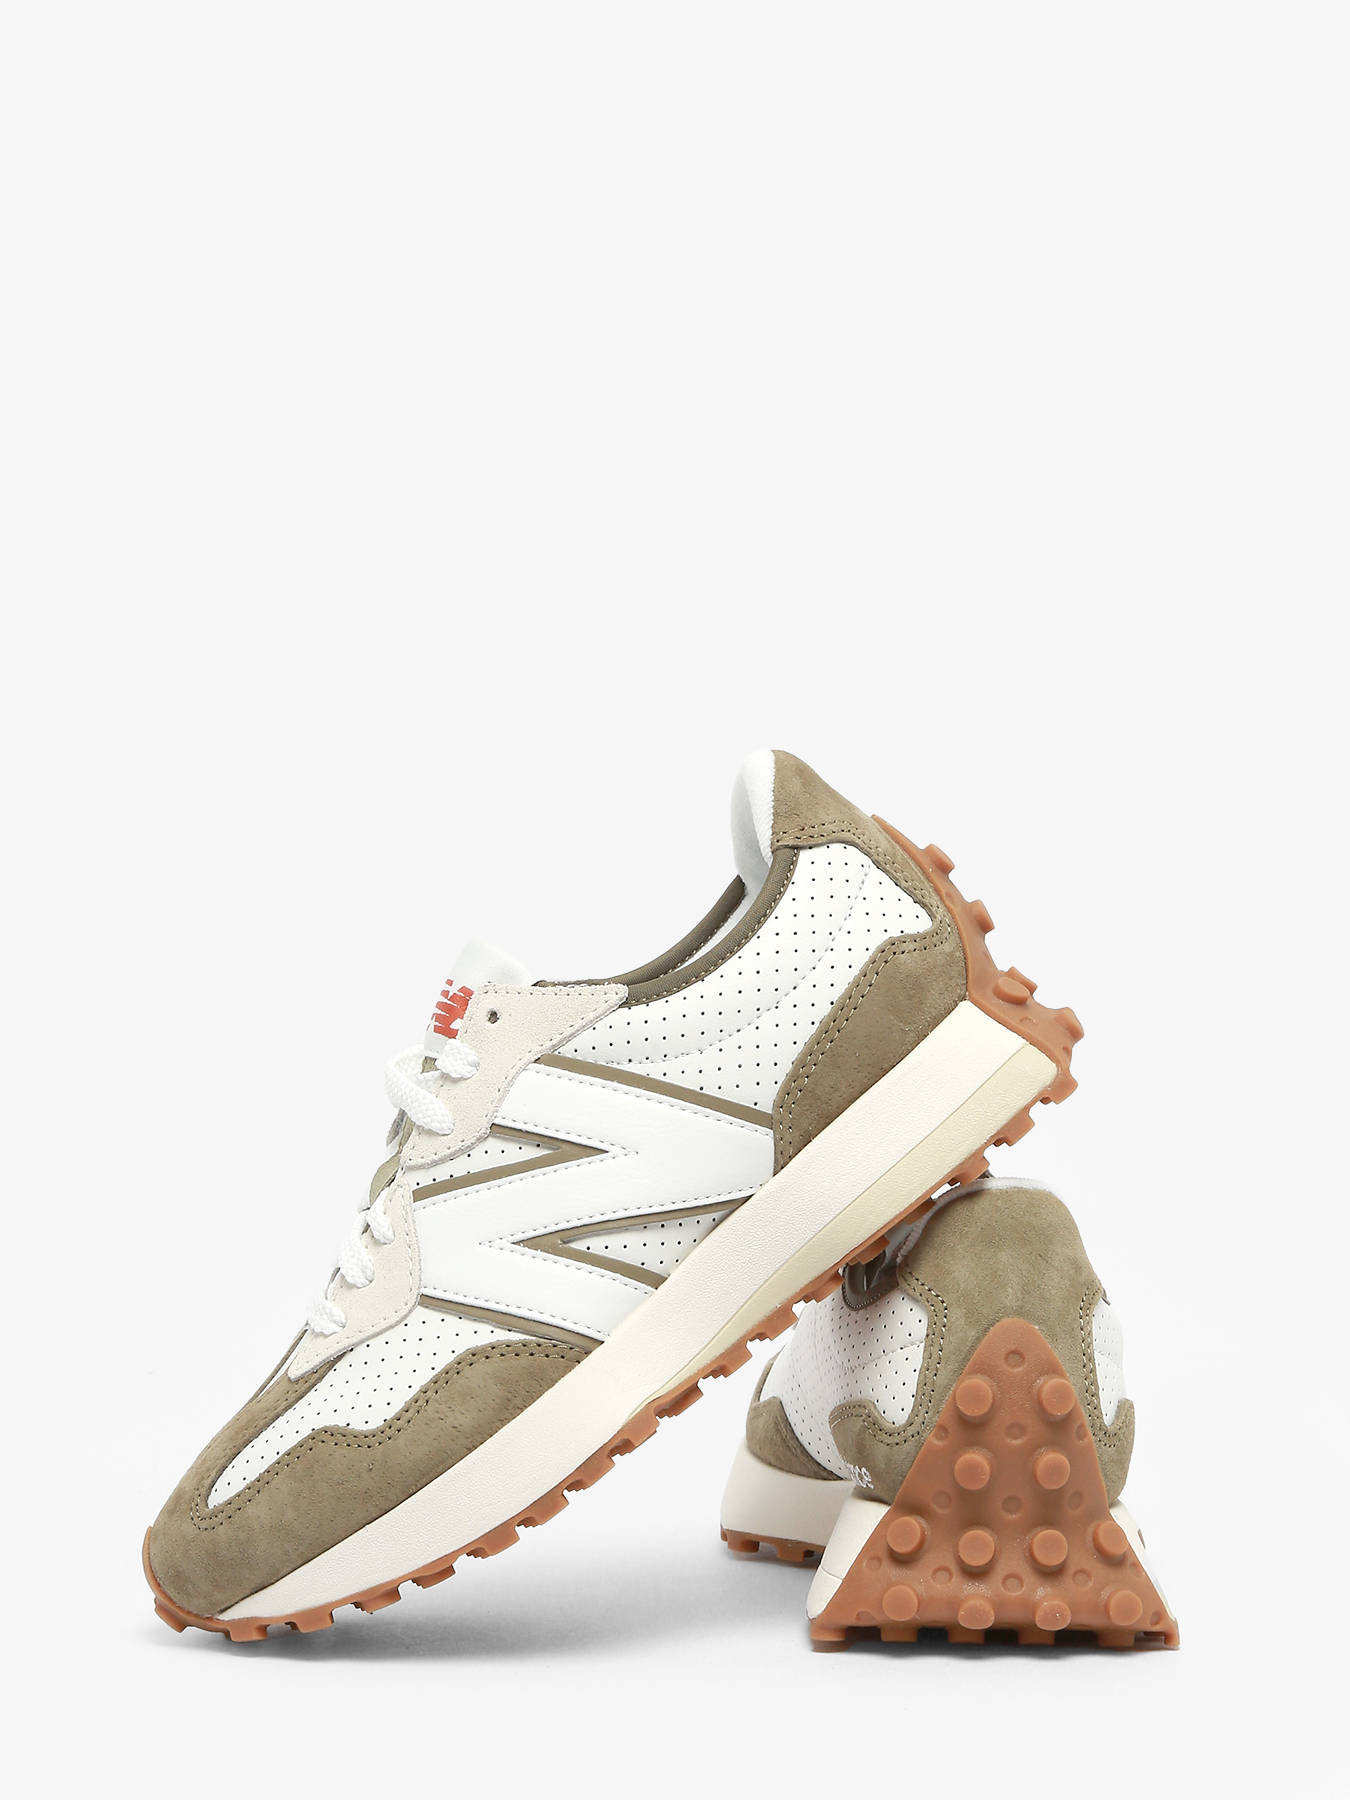 New Balance For him above 100 euros MS327 - best prices